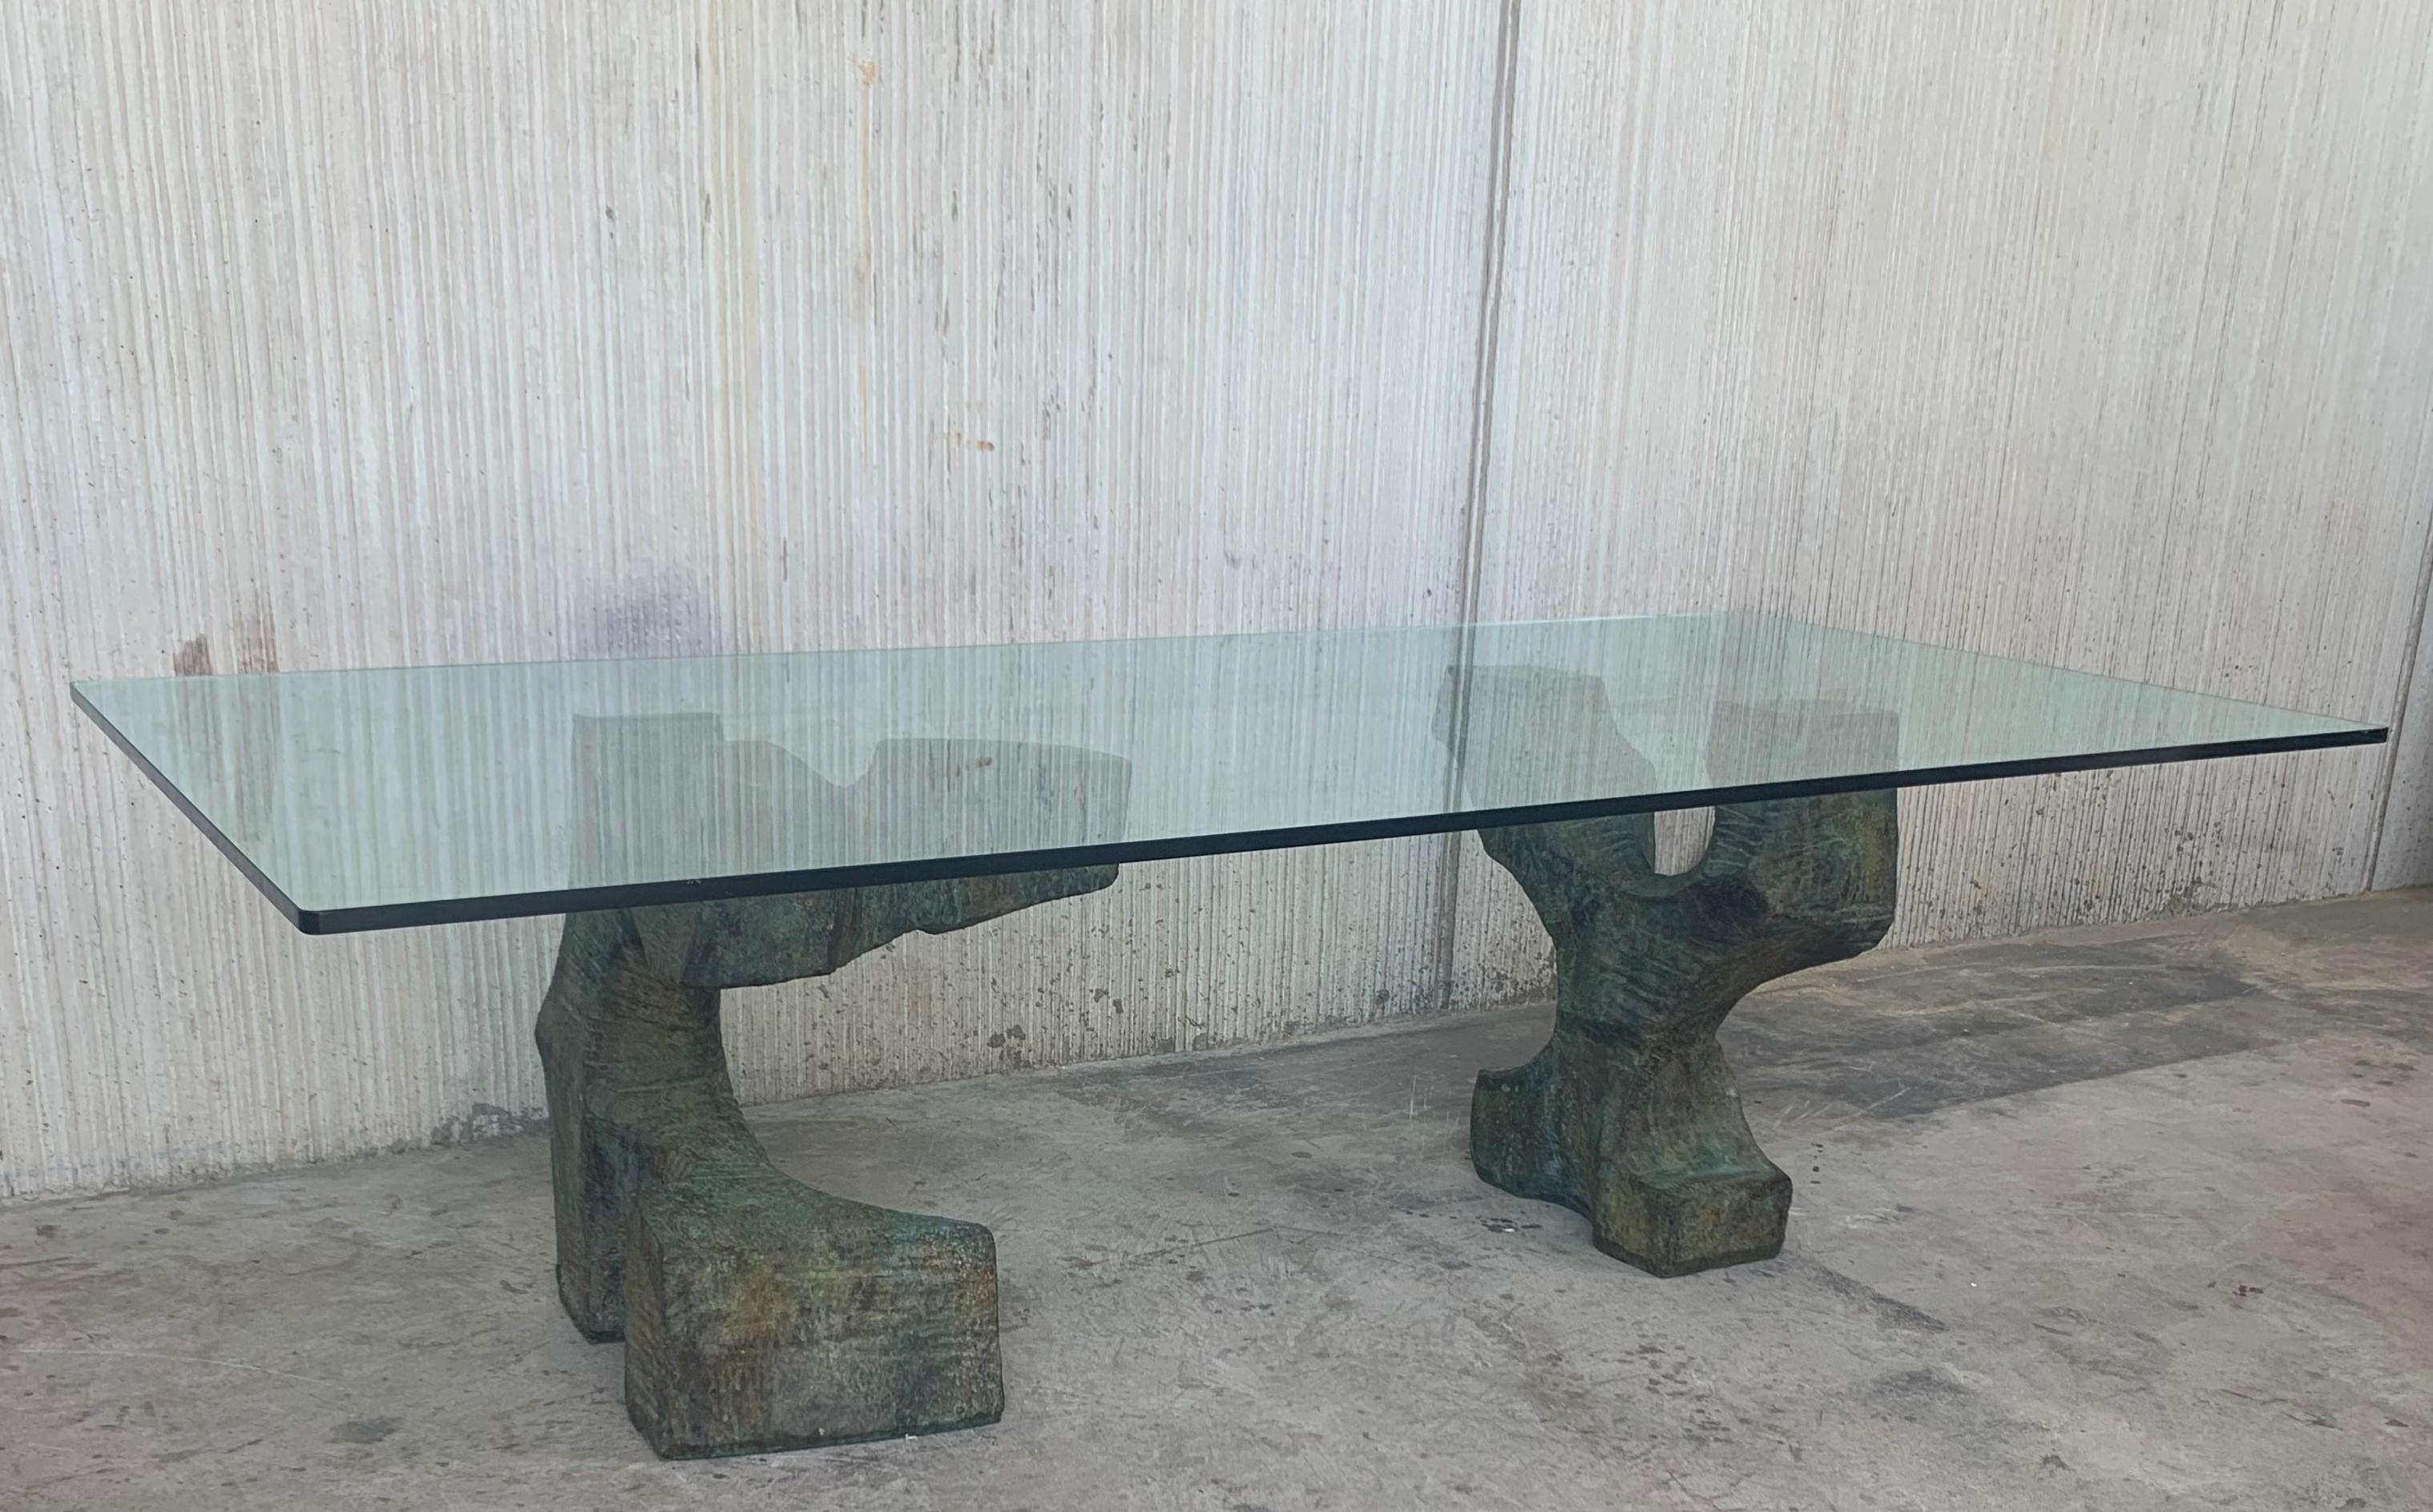 Exceptional Sculpted Pedestals in Bronze, Modern Dining Table by Valenti, Spain 1